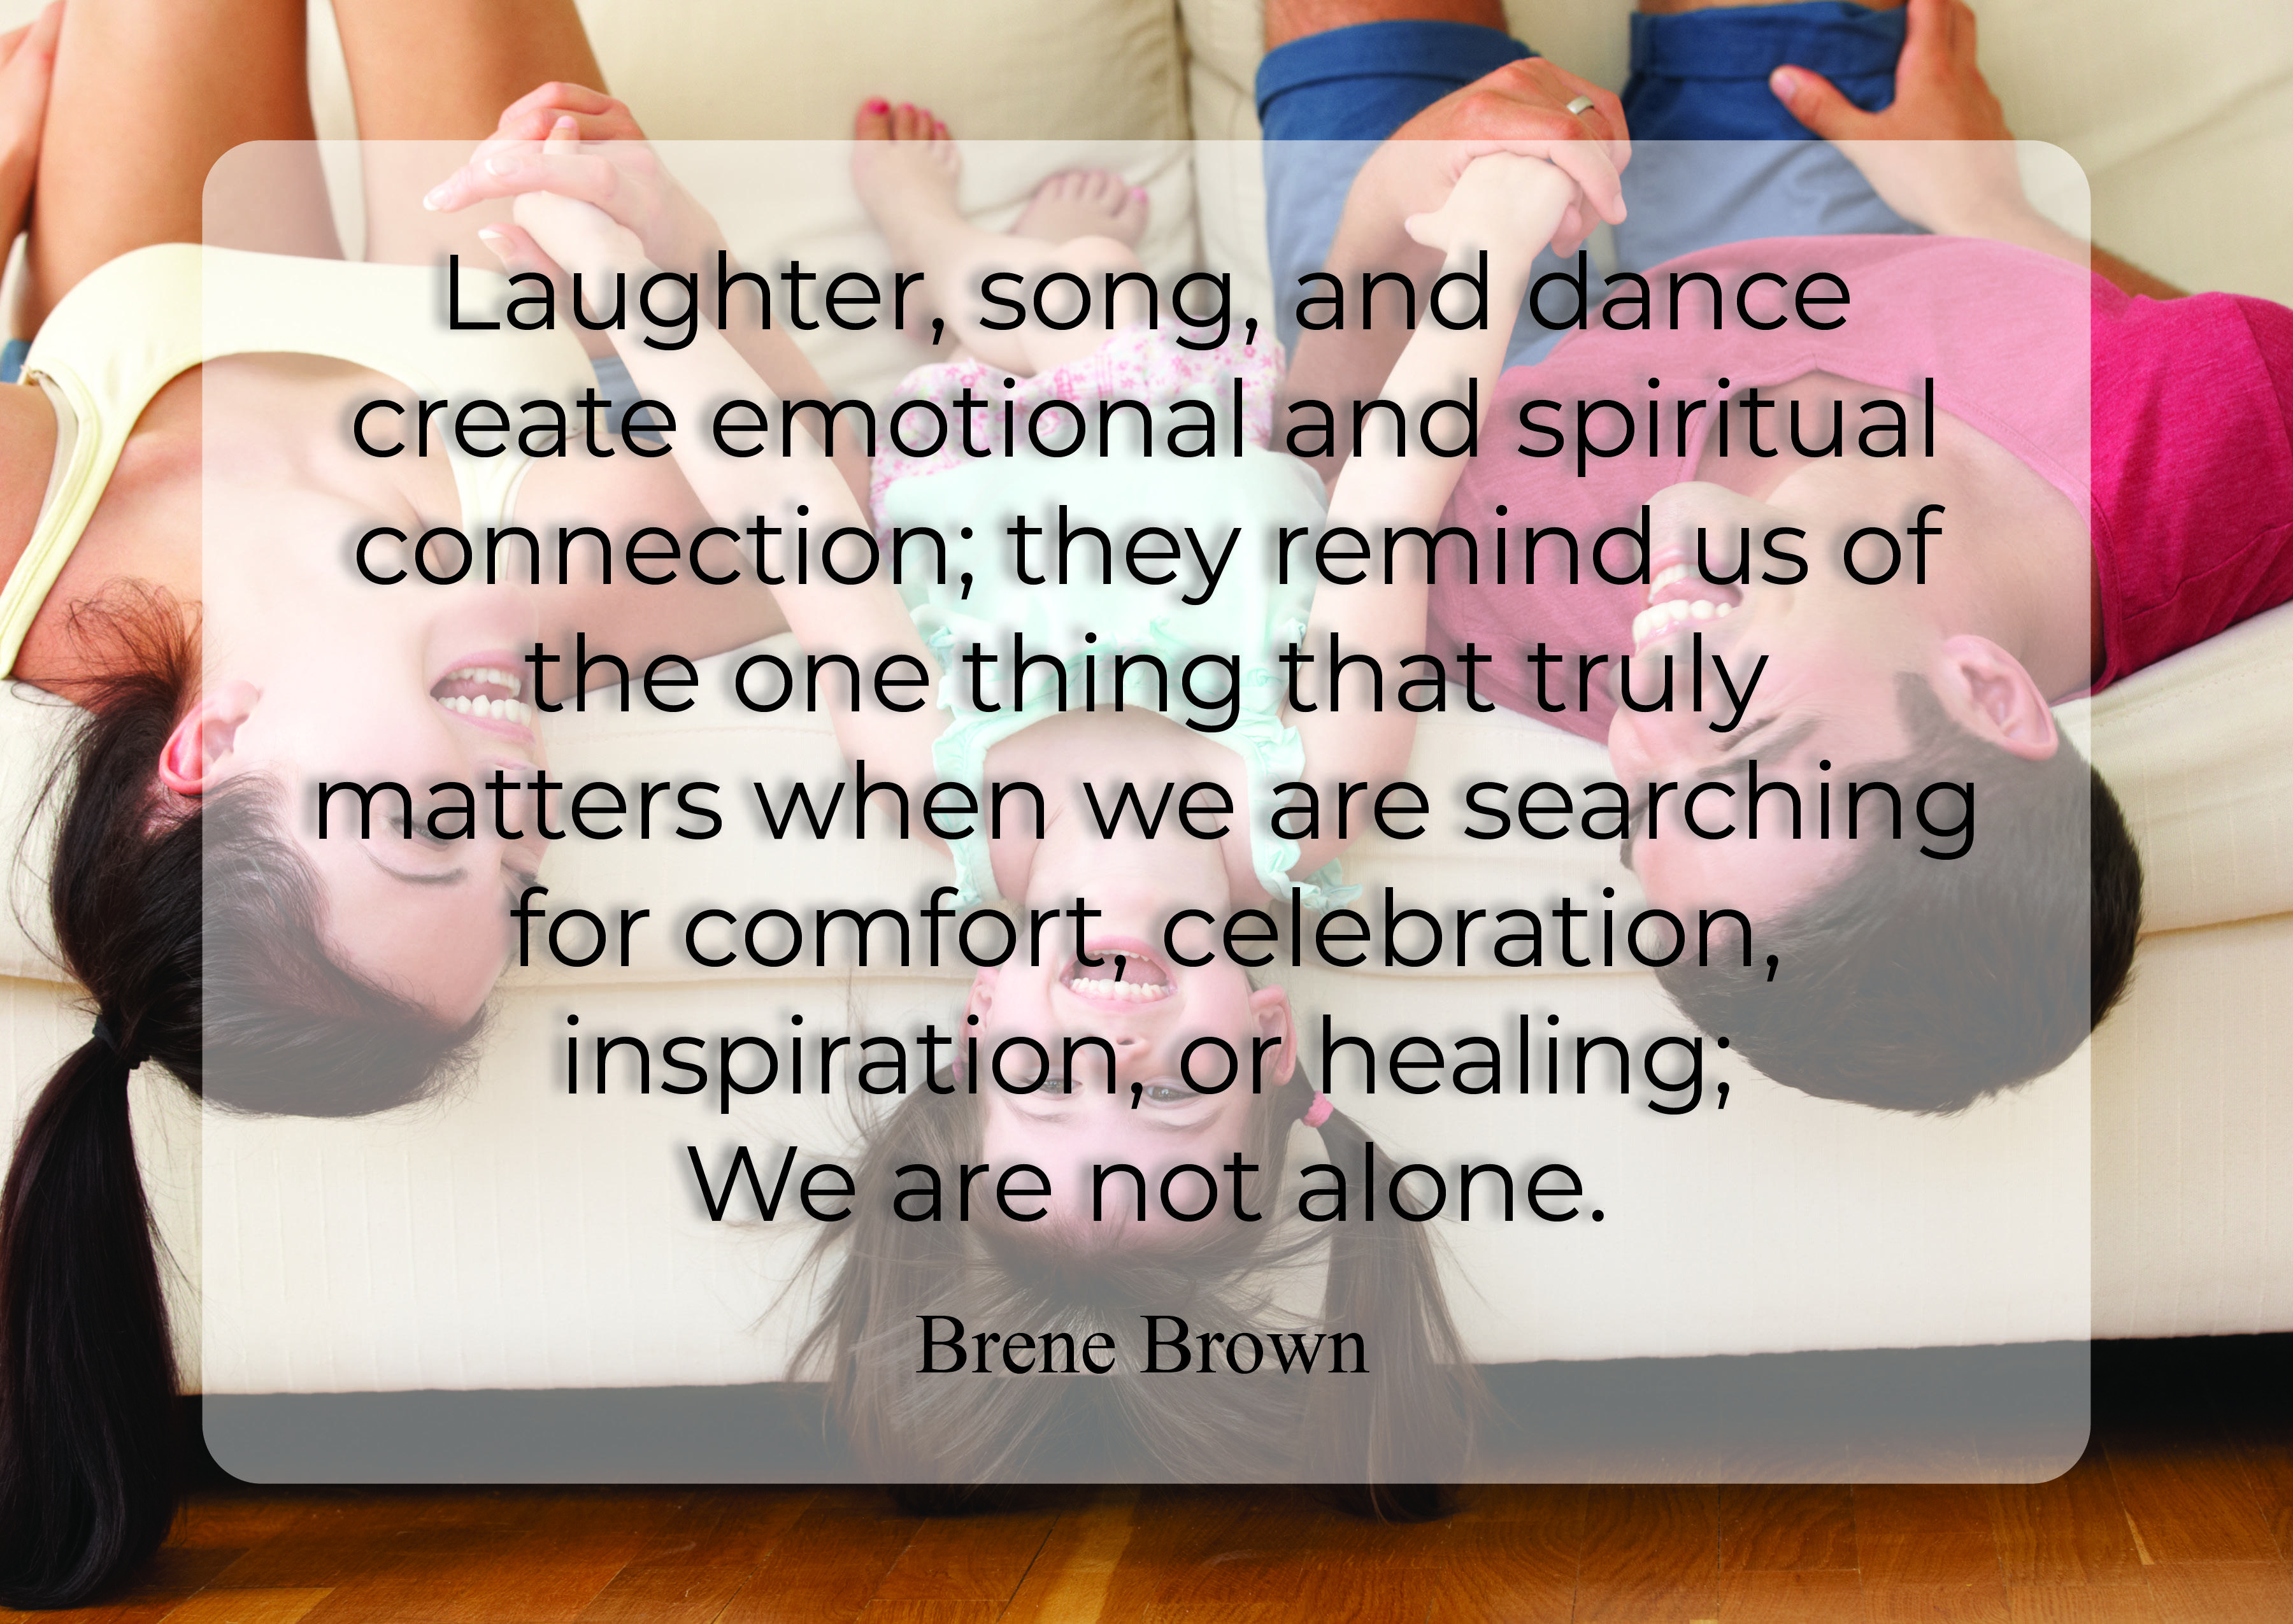 Laughter, song, and dance create emotional and spiritual connection; they remind us of the one thing that truly matters when we are searching for comfort, celebration, inspiration, or healing; We are not alone.